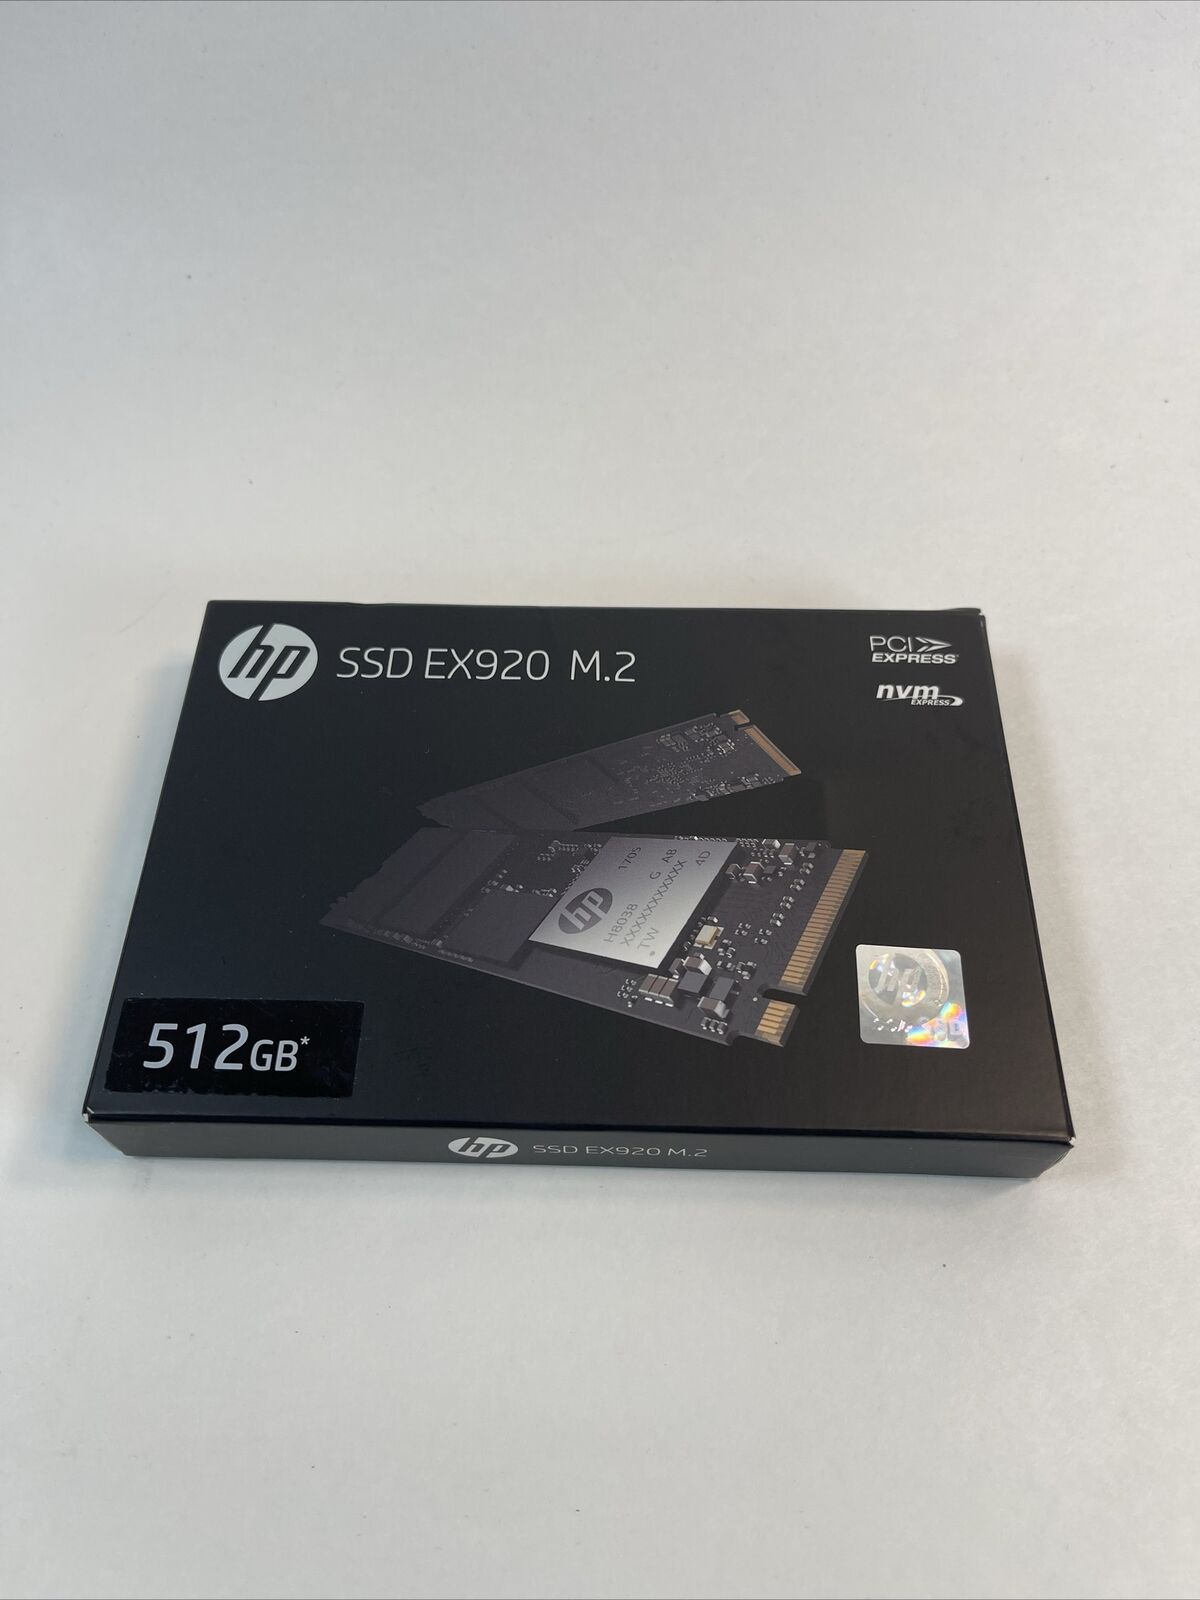 HP SSD EX900 250 GB M.2 PCIe 3.0 NVMe  Solid State Drive